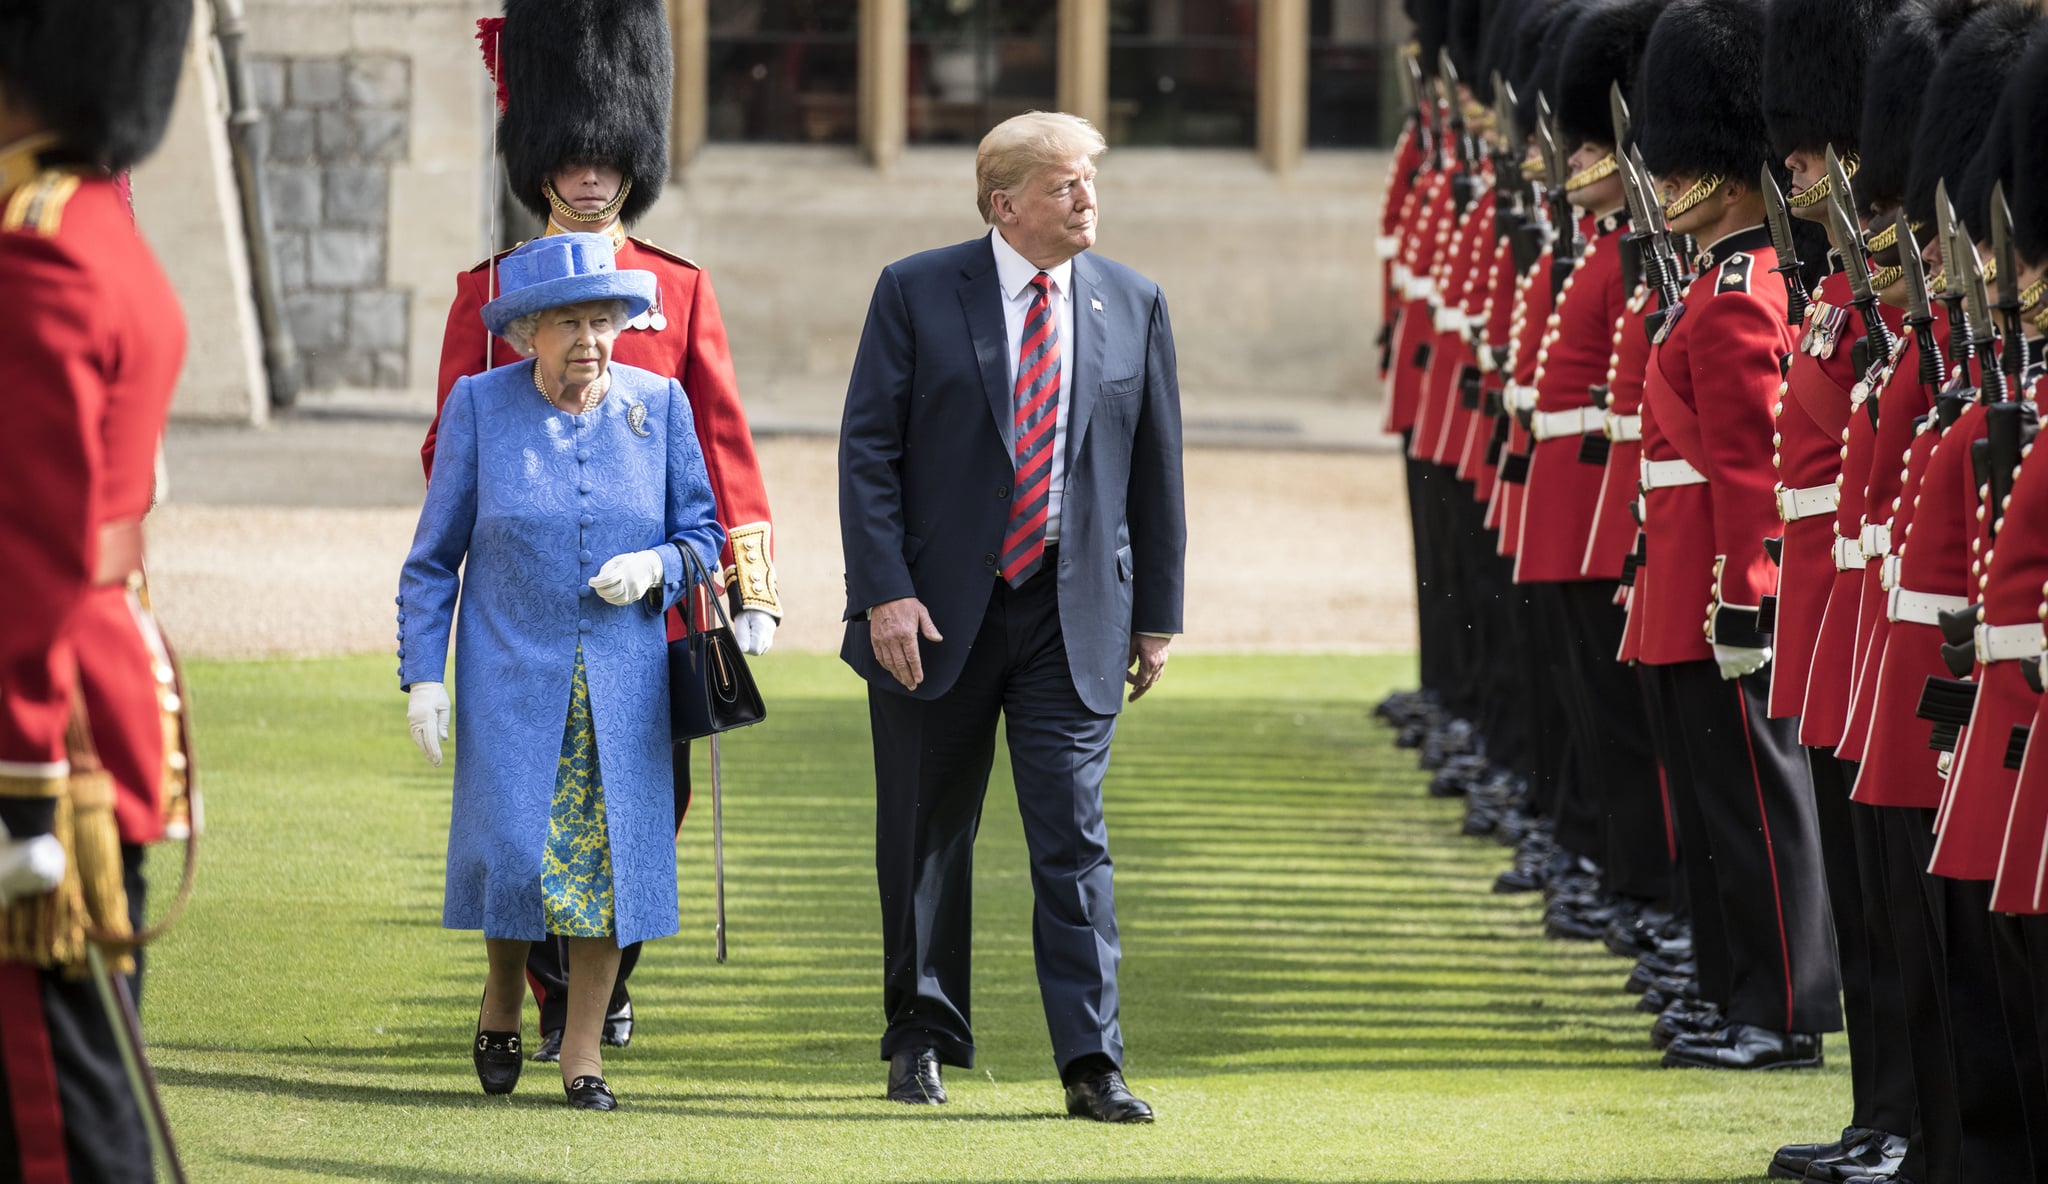 WINDSOR, ENGLAND - JULY 13:  U.S. President Donald Trump and Britain's Queen Elizabeth II inspect a Guard of Honour, formed of the Coldstream Guards at Windsor Castle on July 13, 2018 in Windsor, England.  Her Majesty welcomed the President and Mrs Trump at the dais in the Quadrangle of the Castle. A Guard of Honour, formed of the Coldstream Guards, gave a Royal Salute and the US National Anthem was played. The Queen and the President inspected the Guard of Honour before watching the military march past. The President and First Lady then joined Her Majesty for tea at the Castle.  (Photo by Richard Pohle  - WPA Pool/Getty Images)